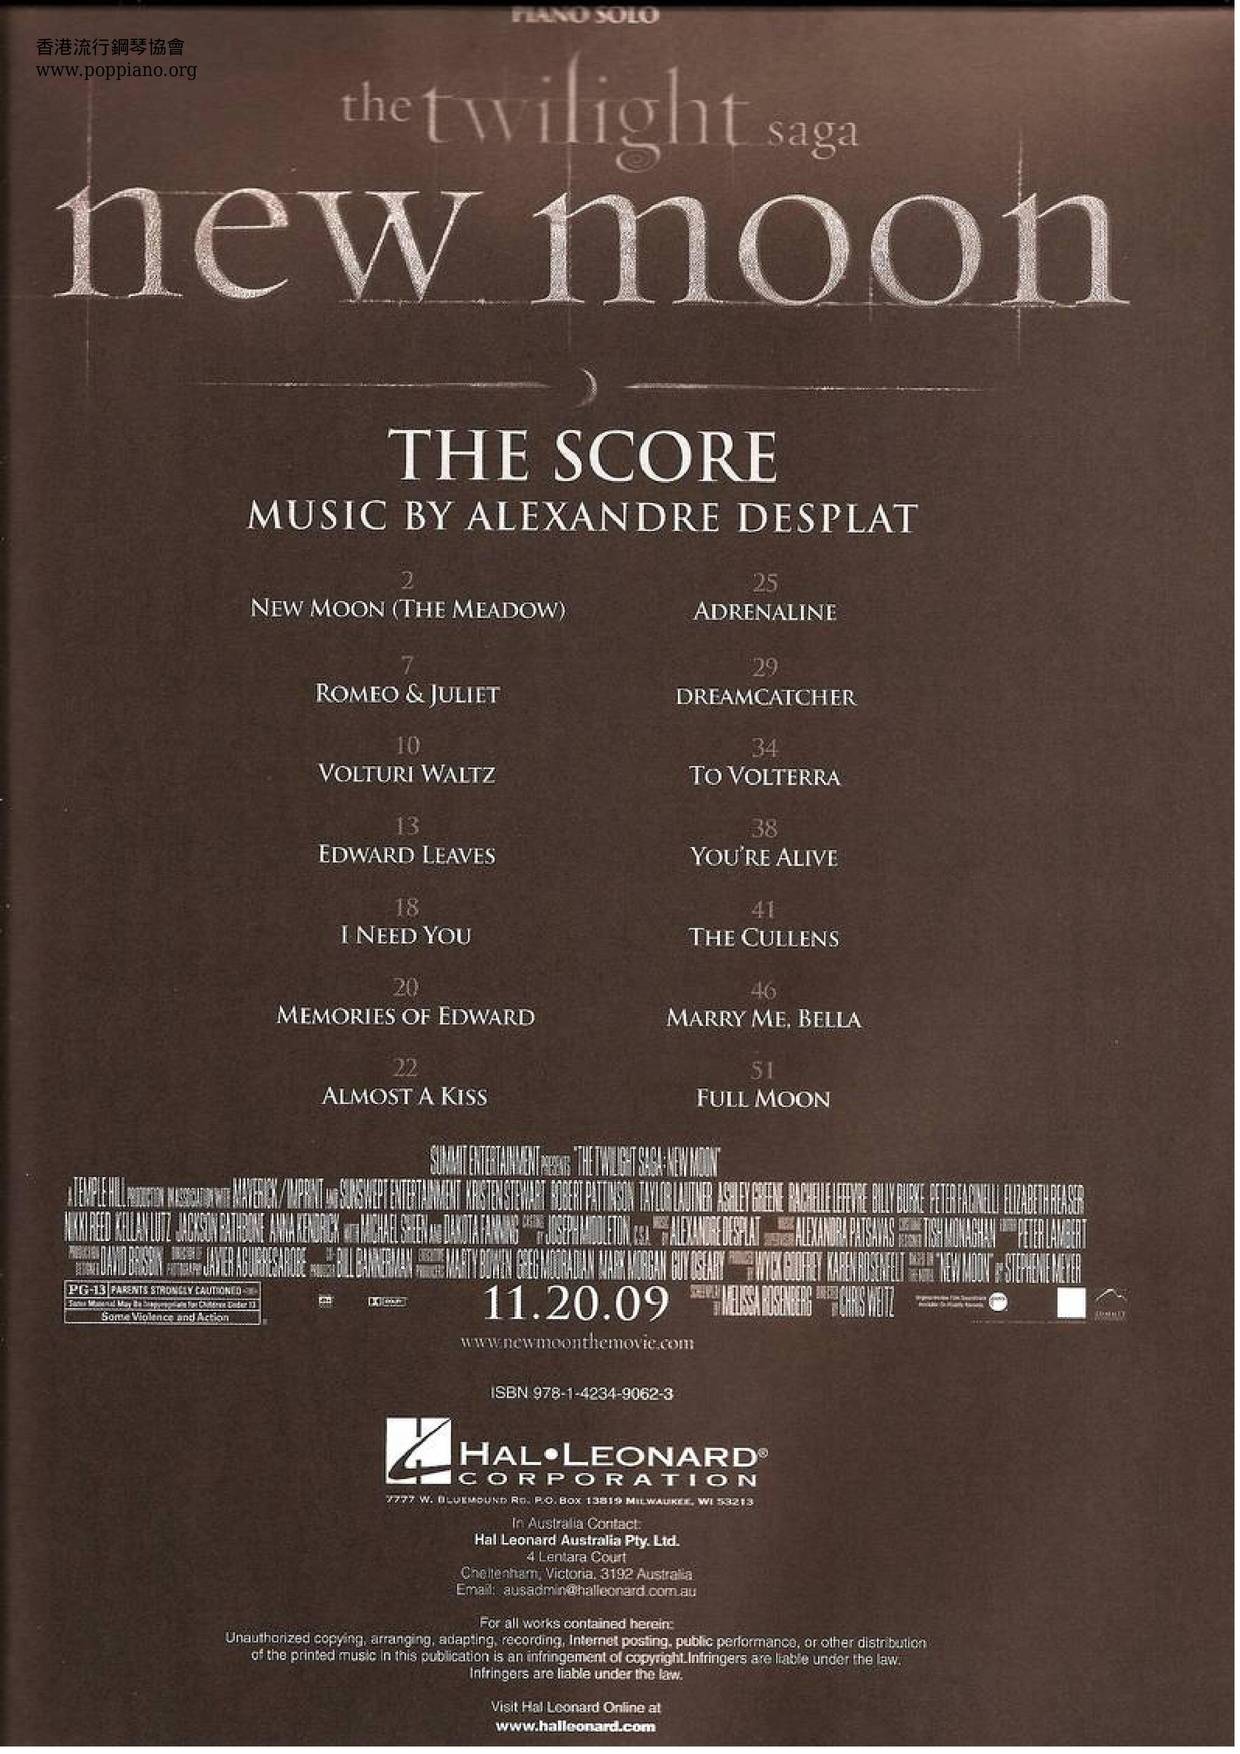 The Twilight Saga: New Moon 57 Pages Score